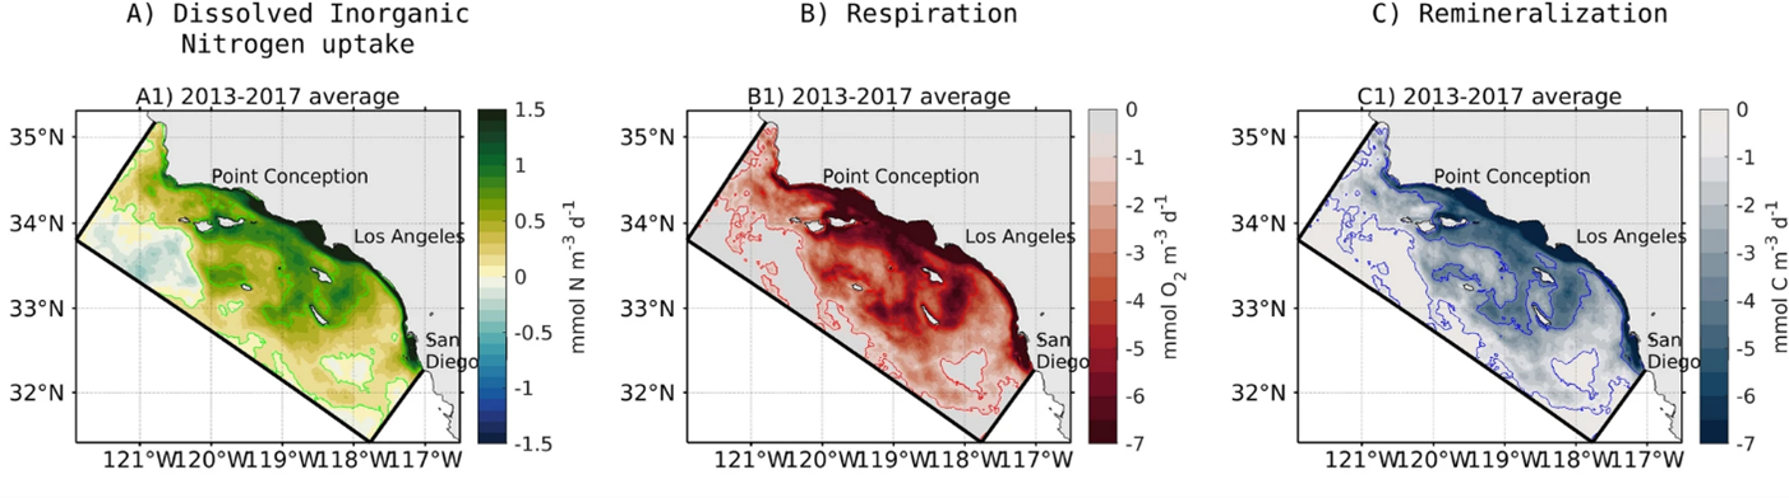 five year averaged maps showing consequence of eutrophication on biogeochemical processes of nitrogen uptake, respiration, and remineralization of organic matter. 